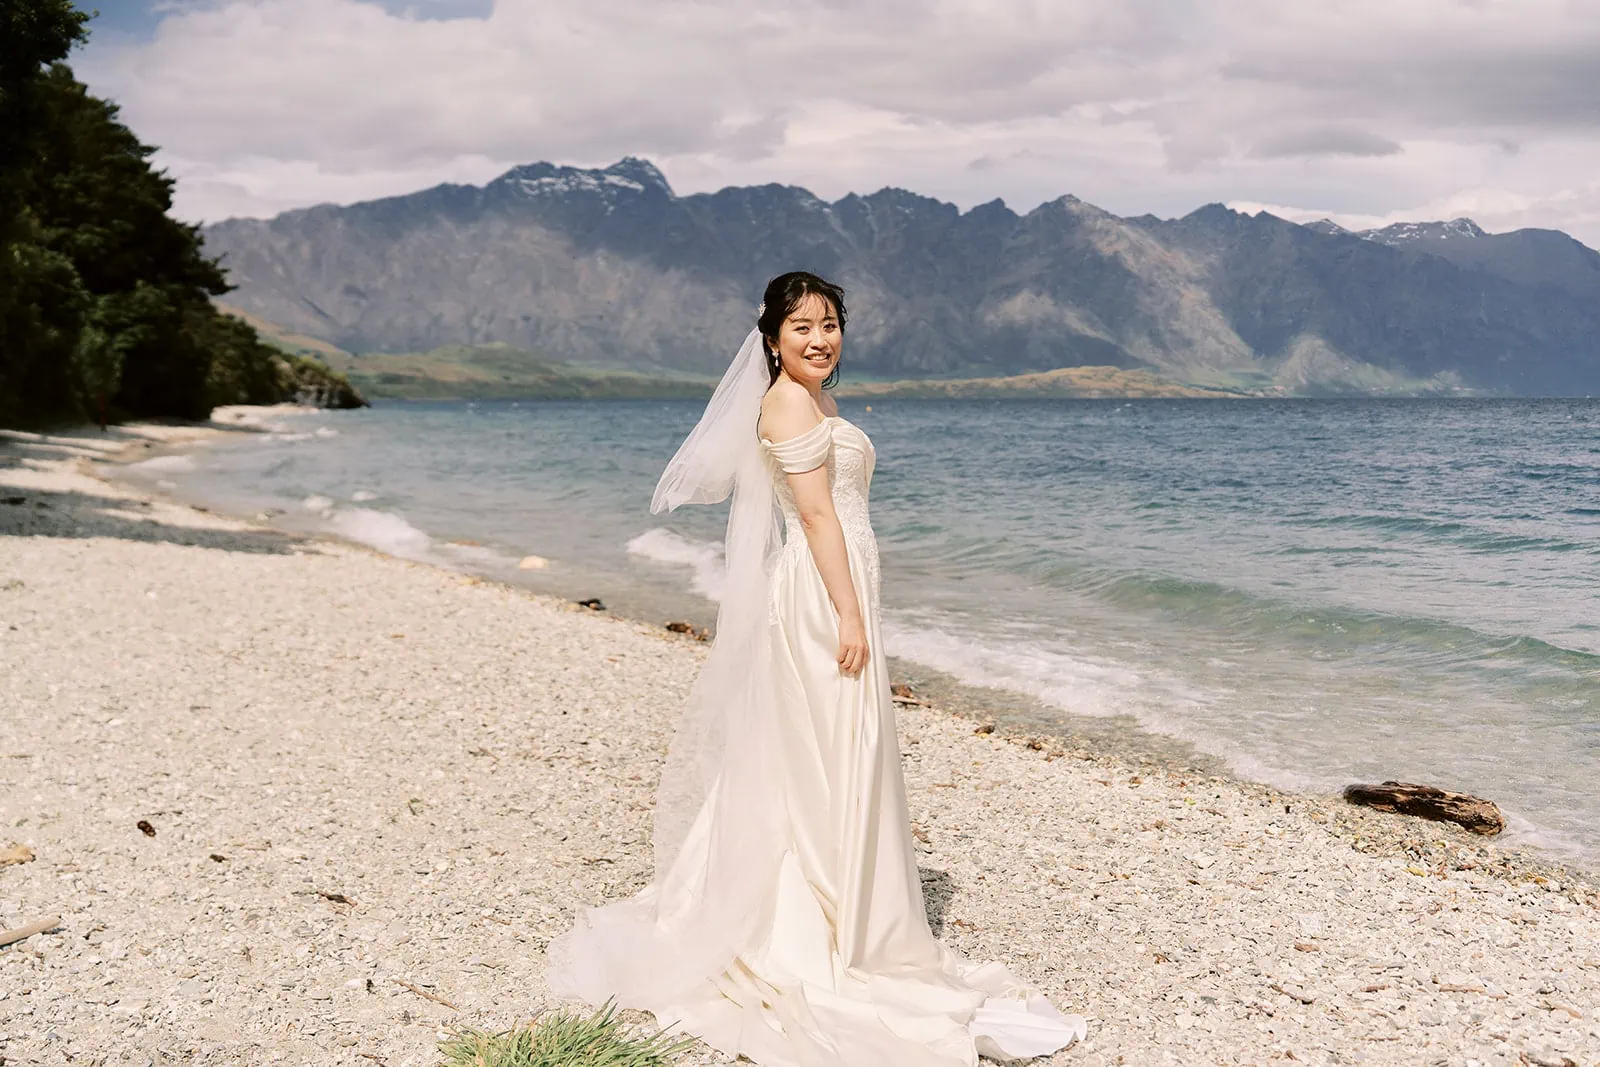 Queenstown Elopement Heli Wedding Photographer クイーンズタウン結婚式 | A bride having a pre-wedding photoshoot on the beach, with mountains in the background.